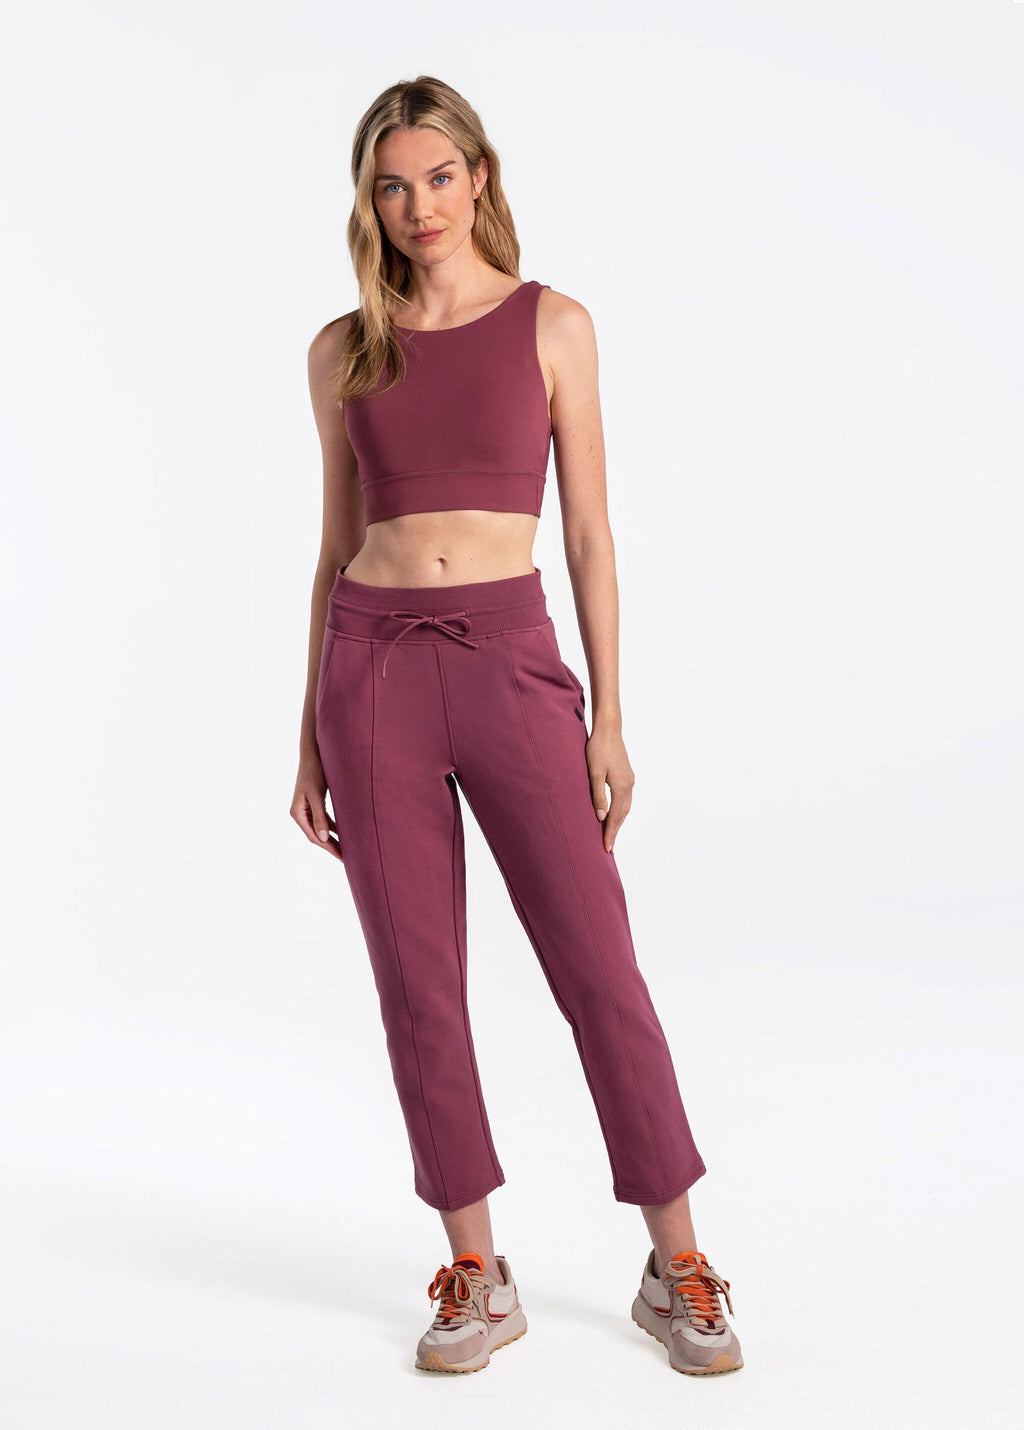 Women's Bottoms – One Tooth Guelph